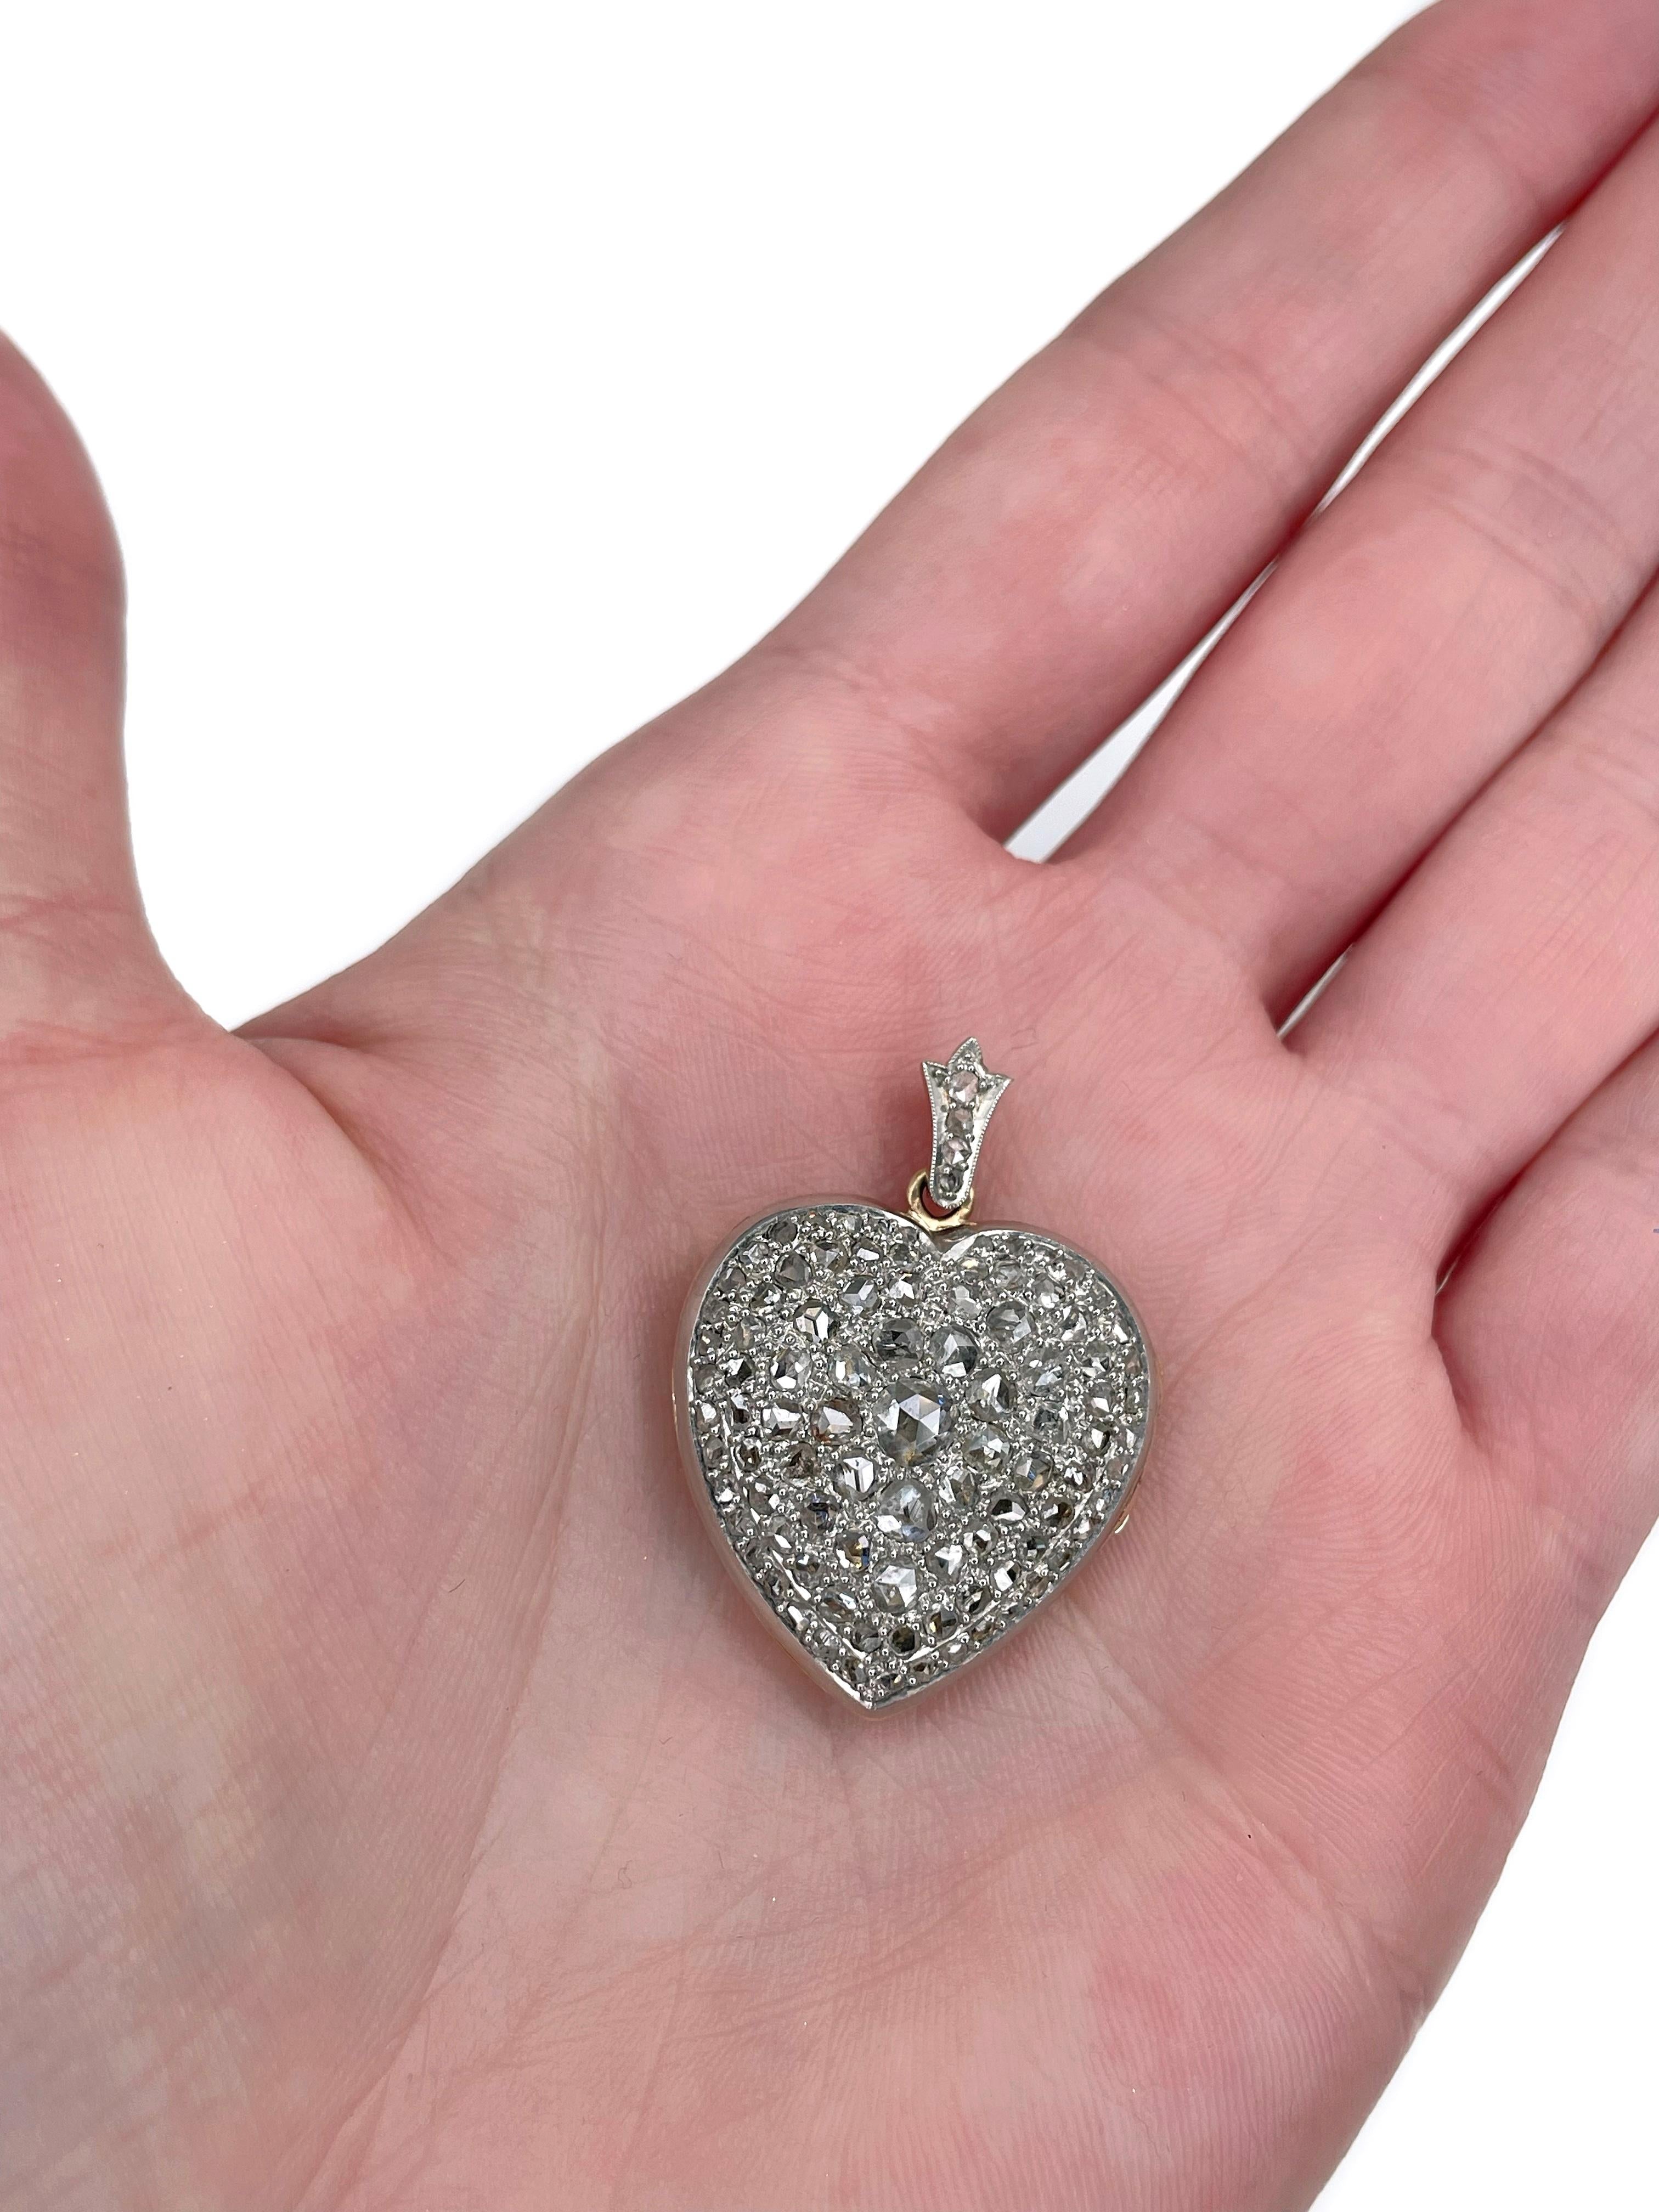 This is a Victorian heart shape locket pendant crafted in 18K gold. Circa 1880. 

The piece features rose cut diamonds. 

Weight: 9.97g
Size: 3.5x2.4cm

———

If you have any questions, please feel free to ask. We describe our items accurately.